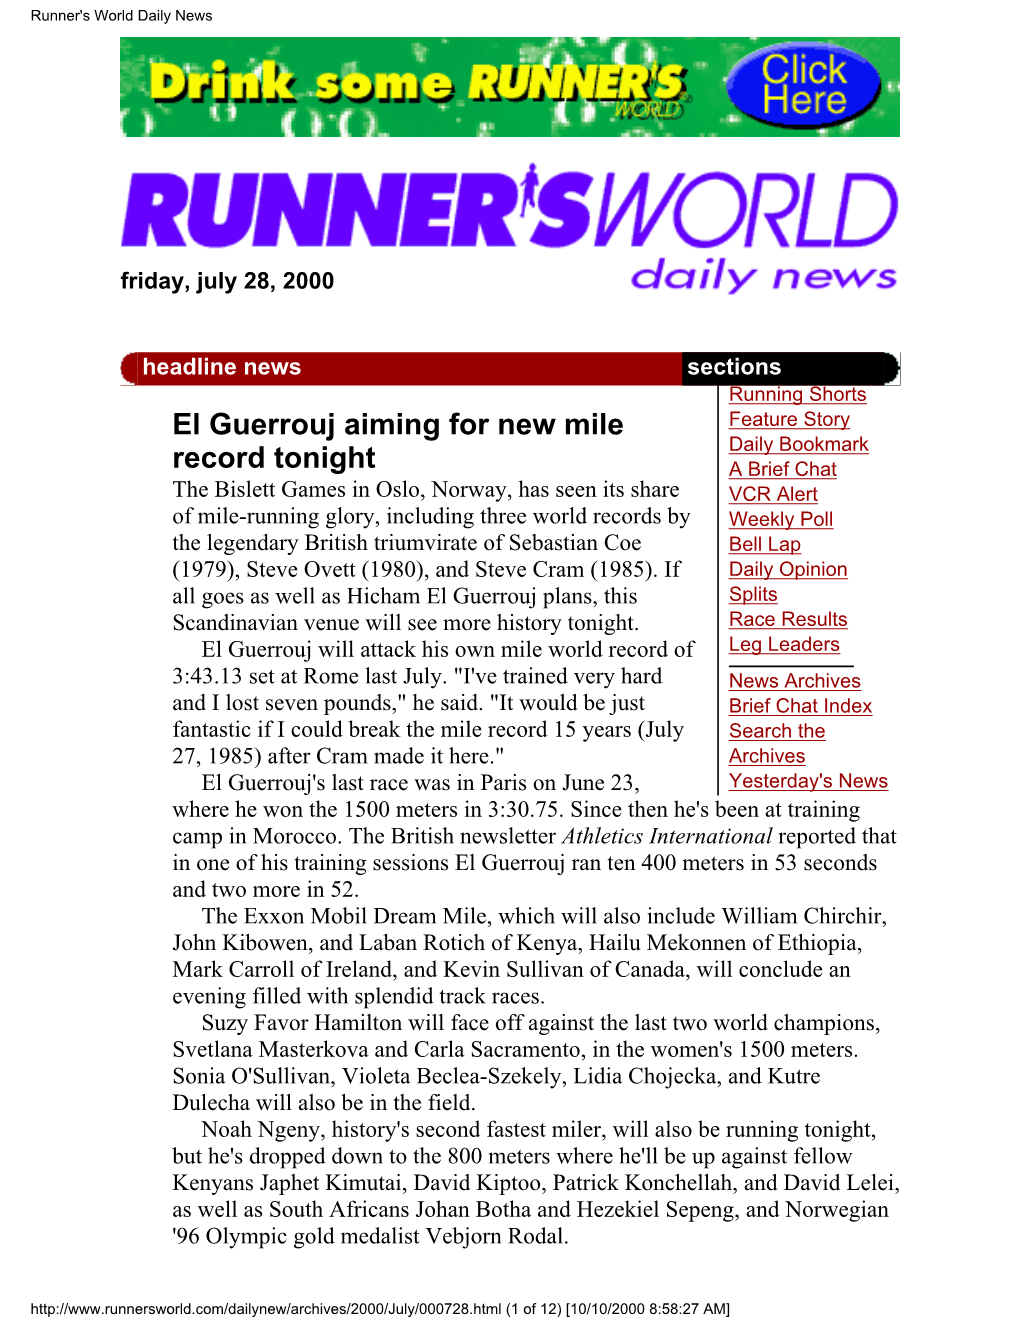 Runners World Kudos Lynx Page Only